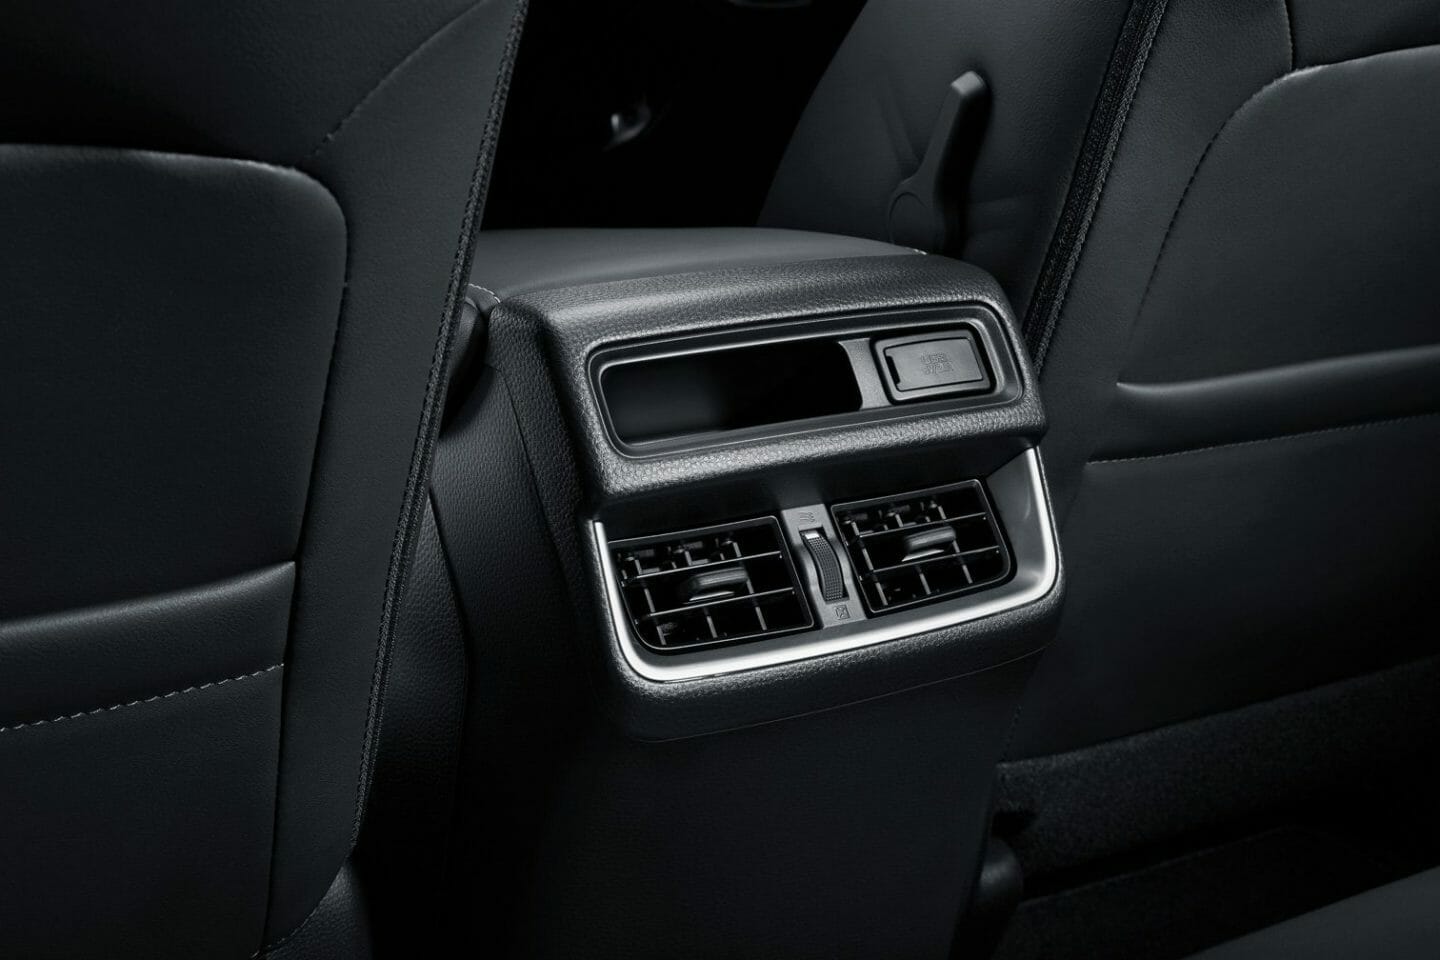 Rear Vents with USB Charging Port